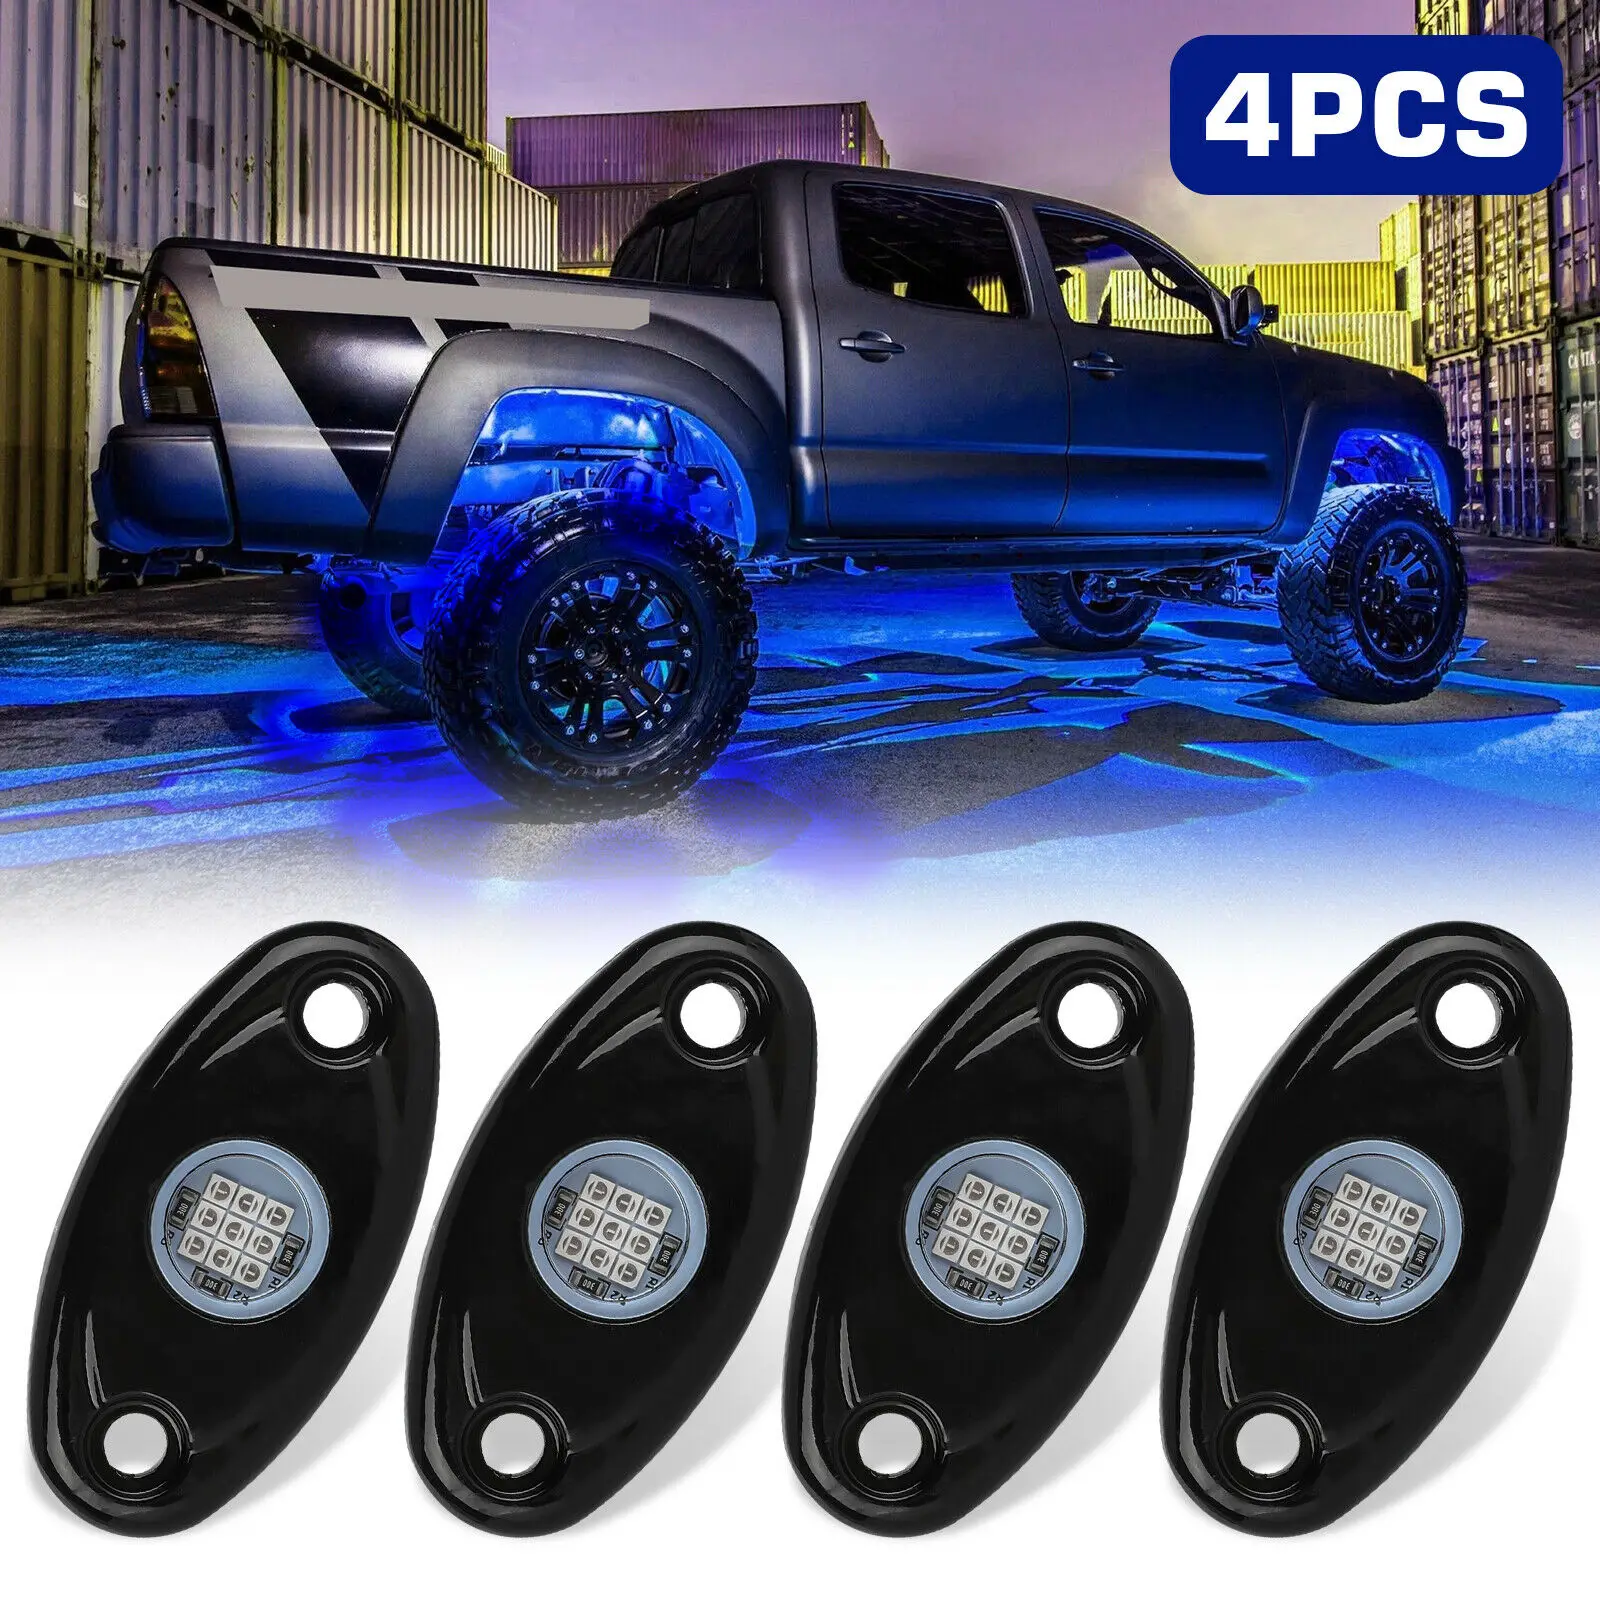 4 Pods LED Rock Lights Waterproof LED Neon Underglow Light For Car Truck Red Blue Cars Boat Underbody Glow Trail Rig Lamp Tool